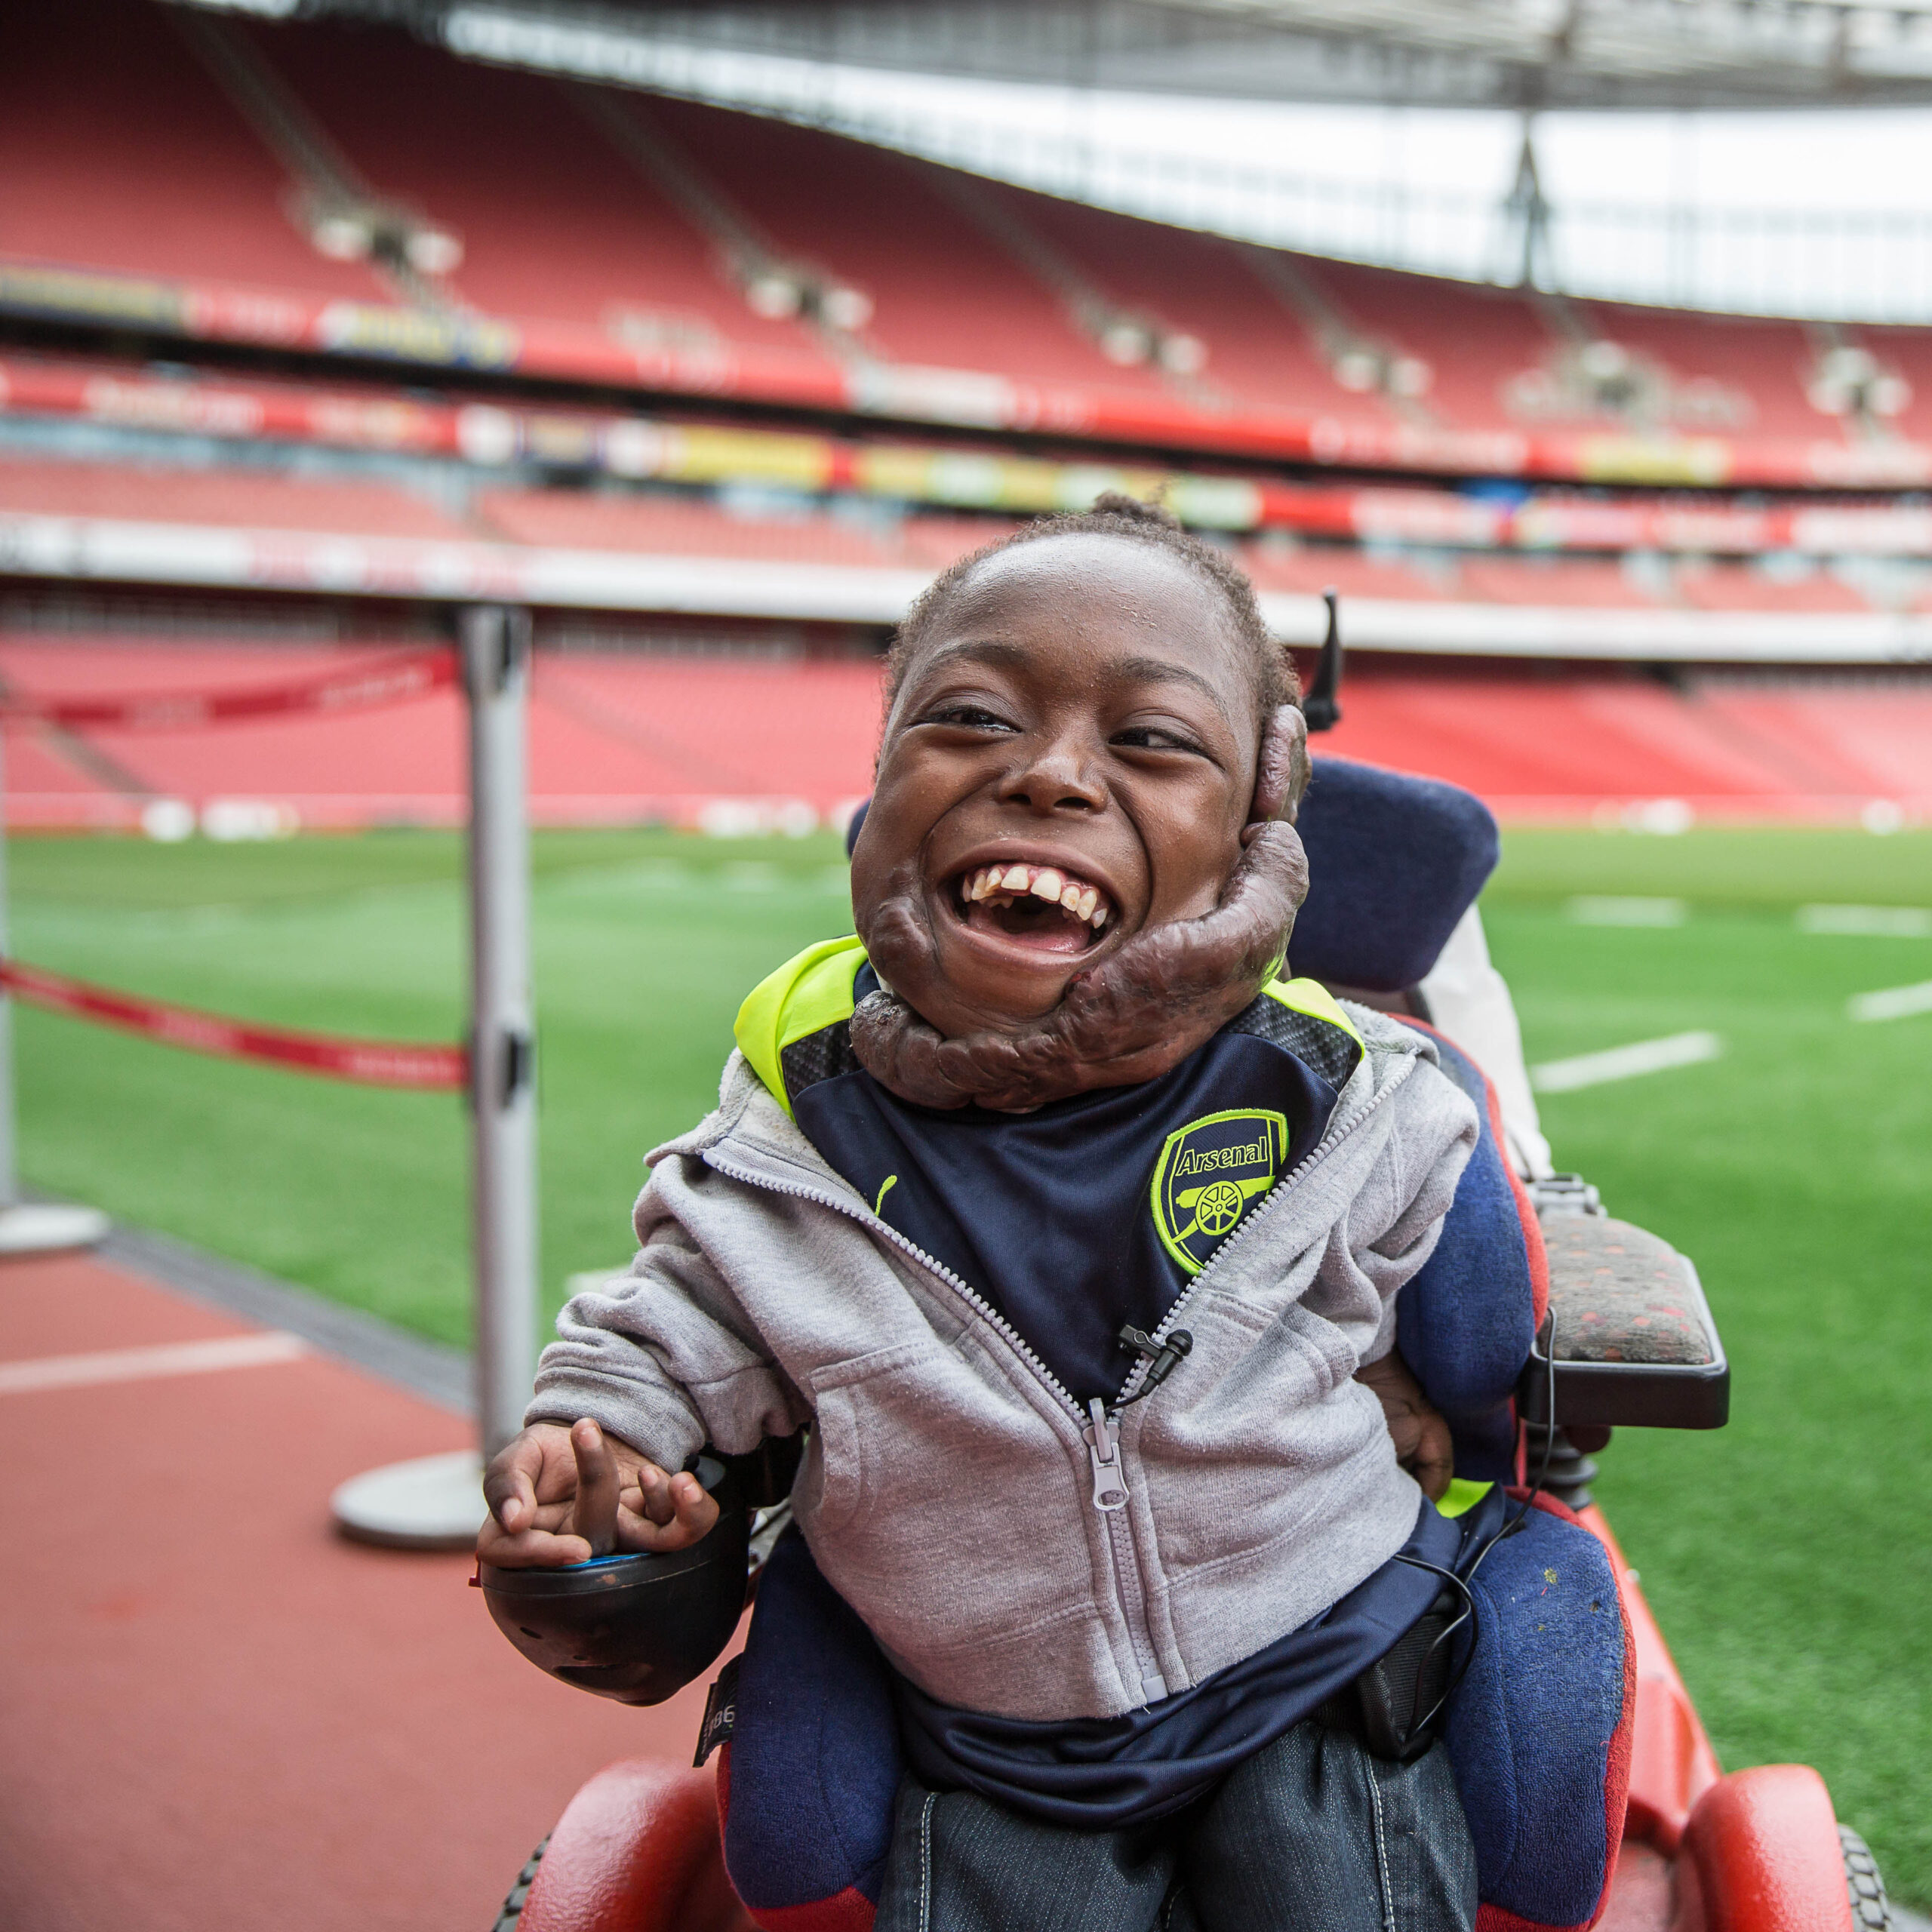 Charity Dreams Come True organise a trip to Emirates Stadium for a young Arsenal superfan, with support from Pennies donations